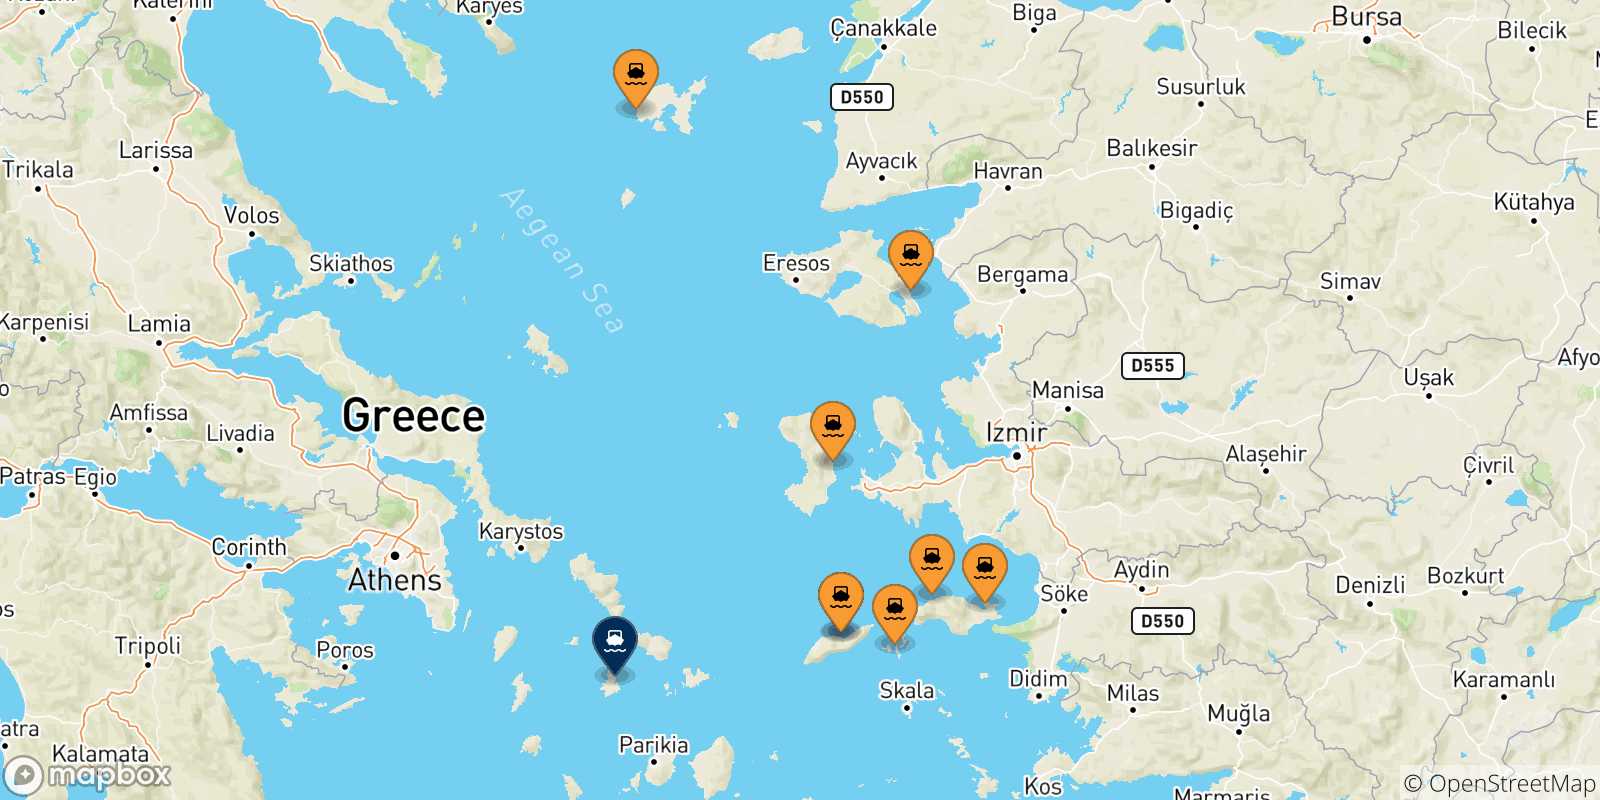 Map of the possible routes between Aegean Islands and Syros